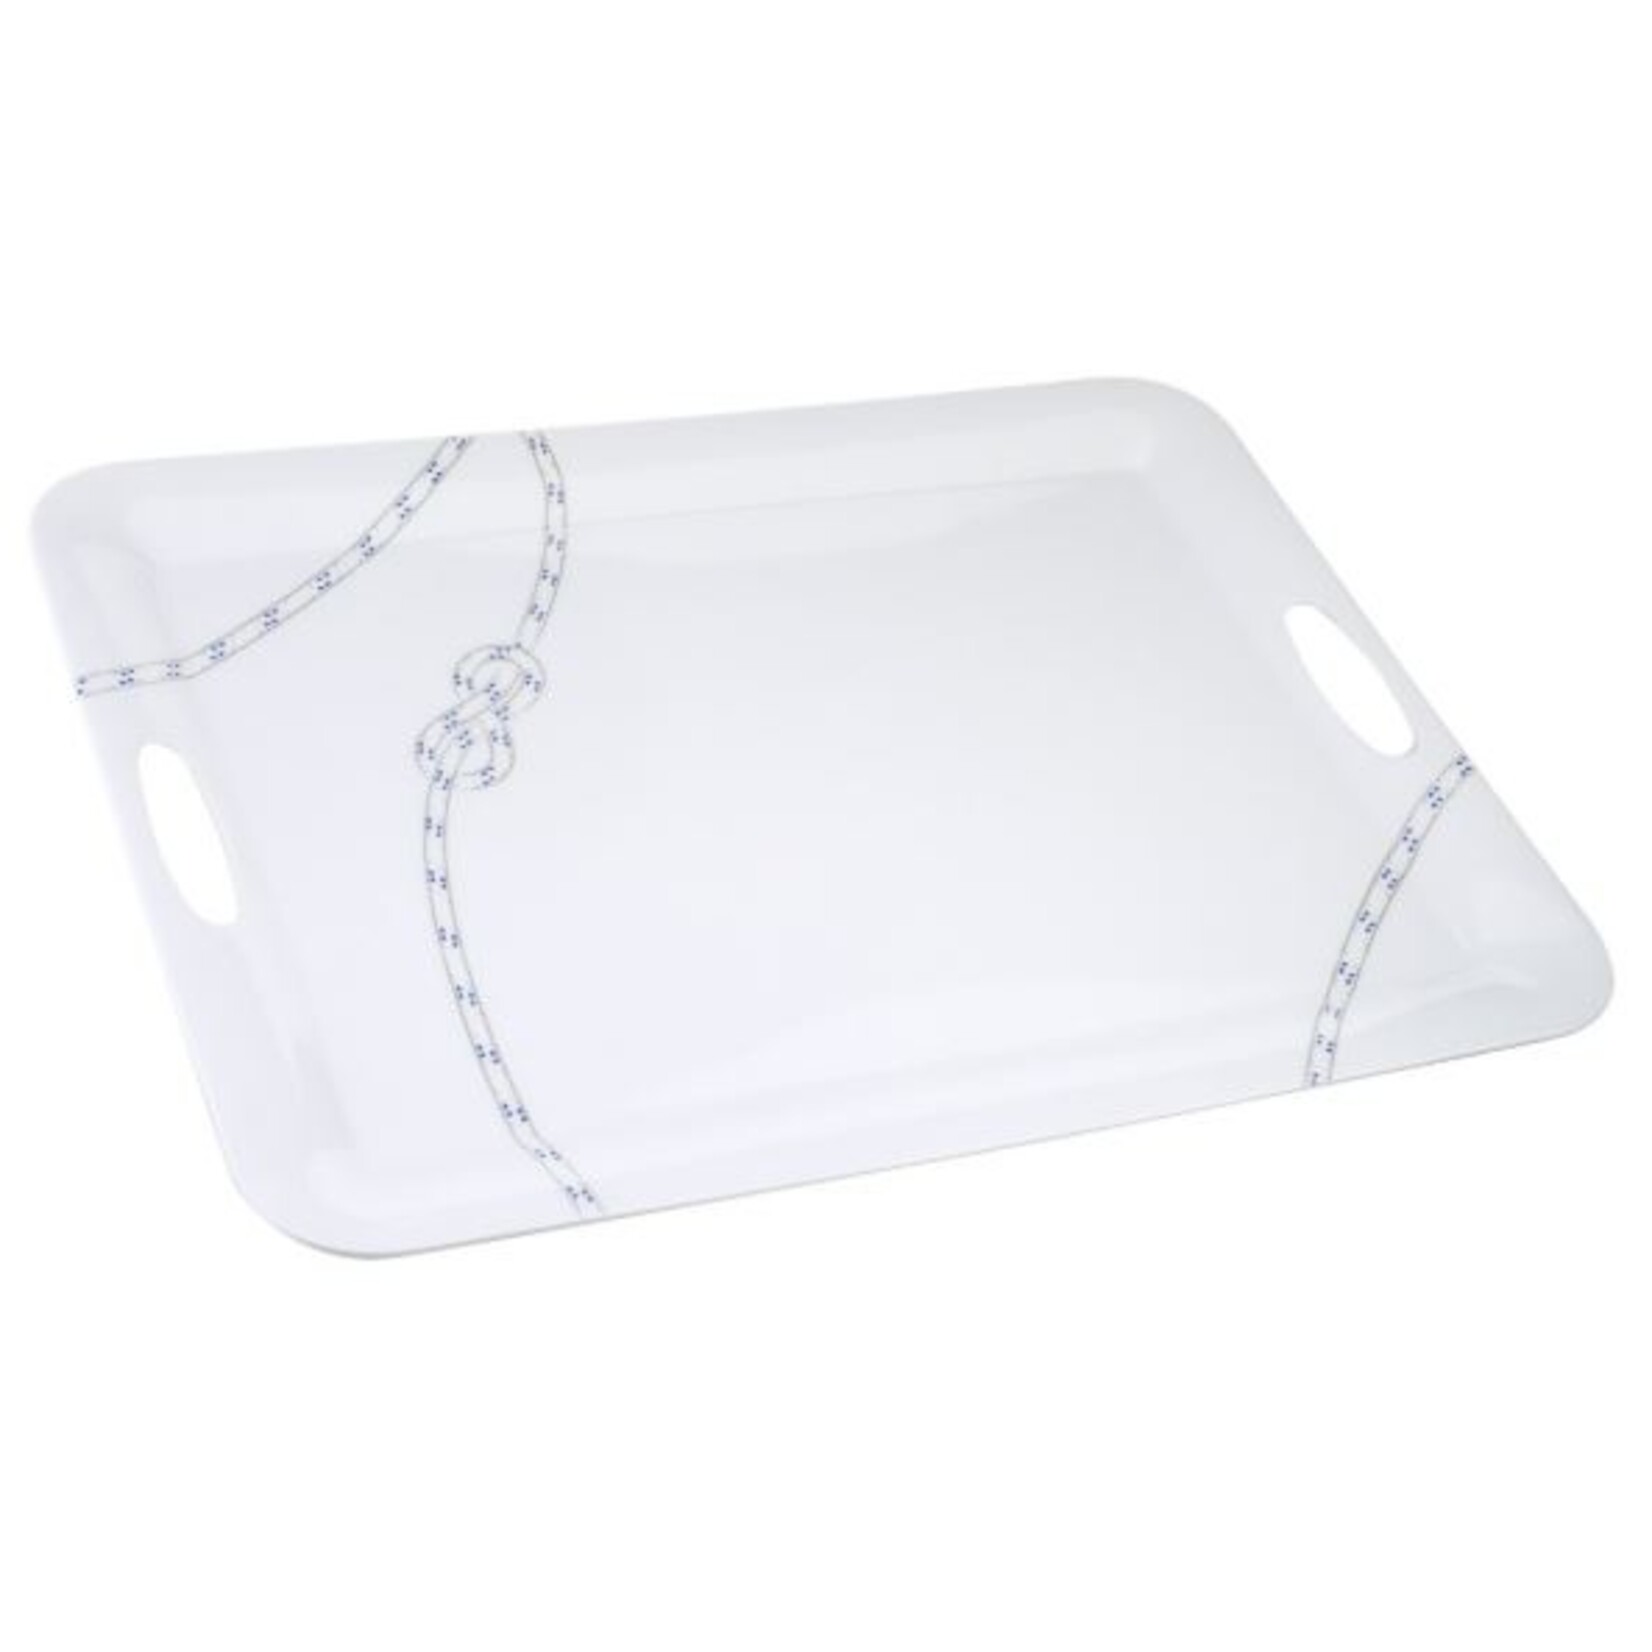 Plastimo South pacific tray